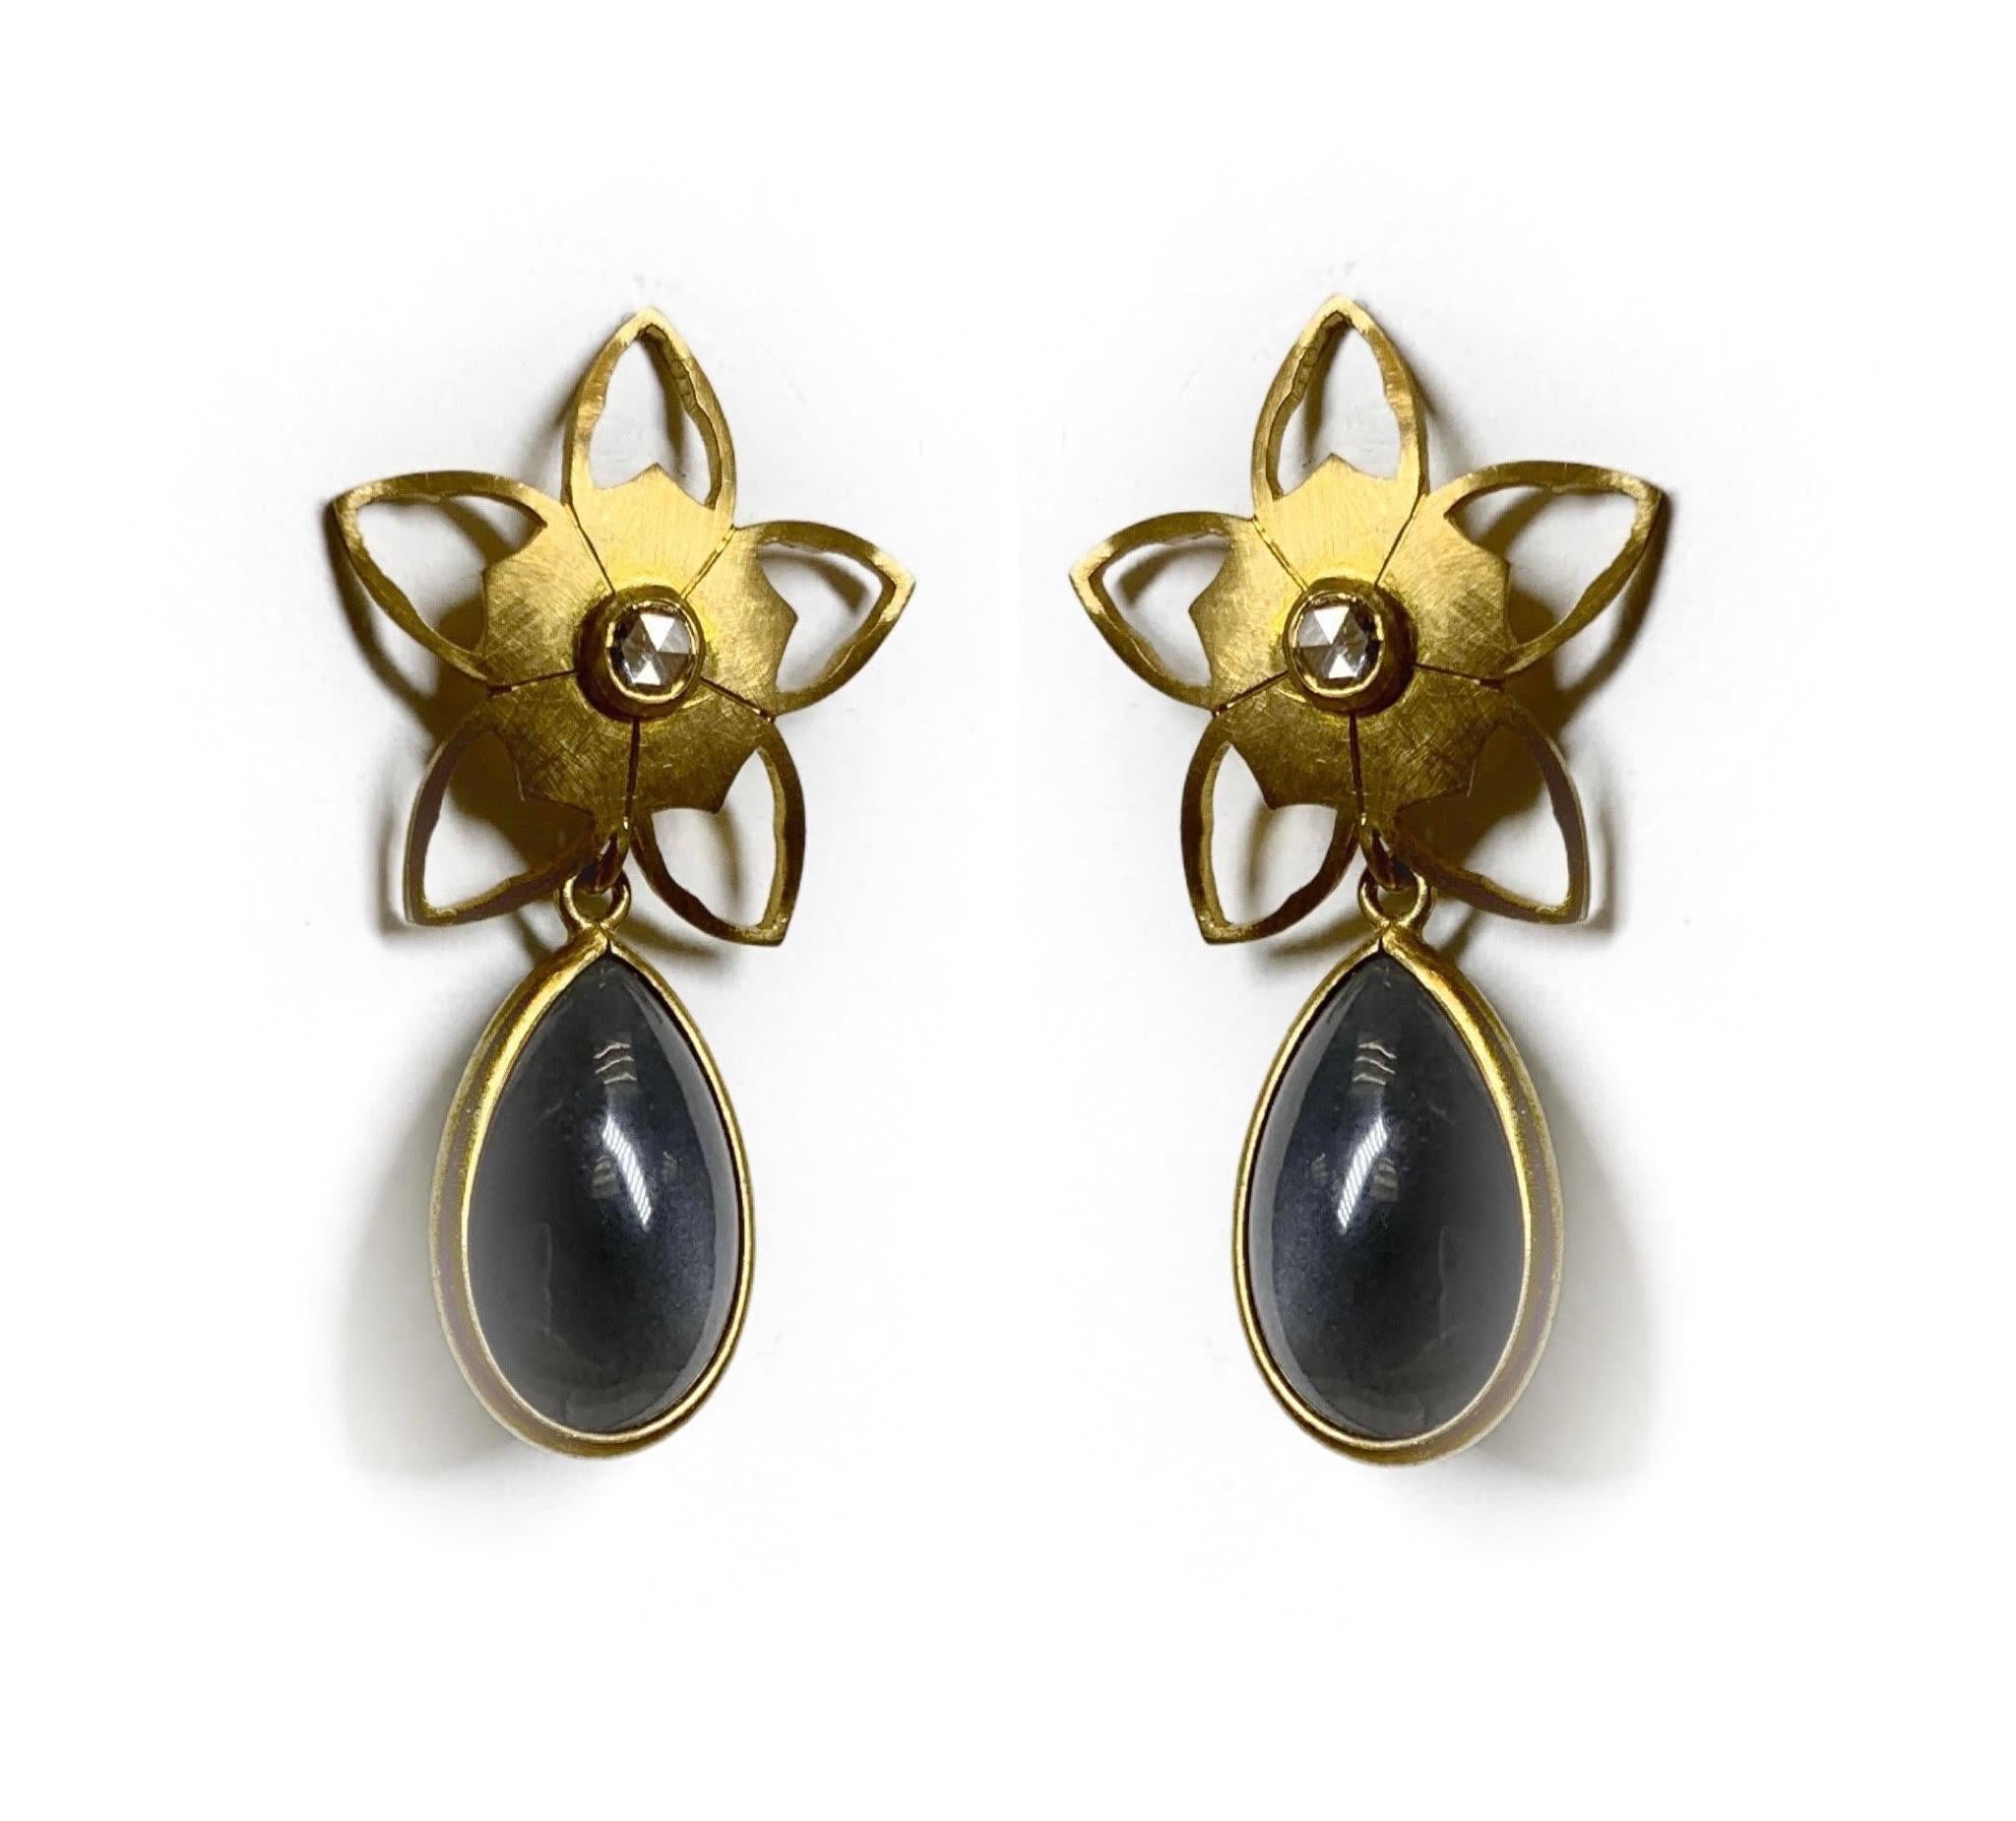 These very unique detachable earrings come with a flower made out of 18 Karat Yellow Gold and diamond center along with two detachable pear shaped Moonstones, either in white or in grey Moonstone. 

Moonstone is known to cultivate compassion and